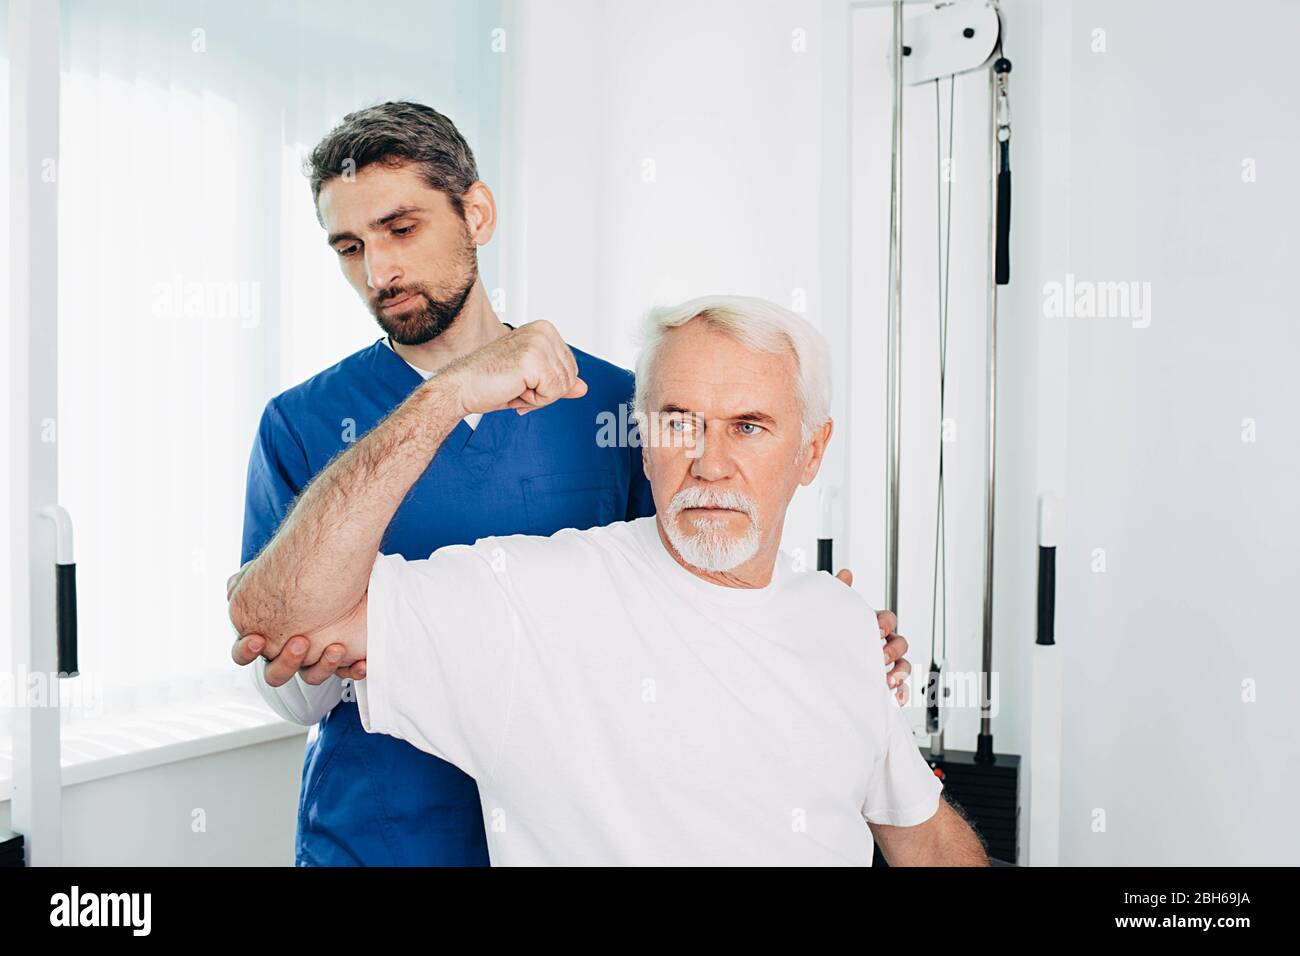 Male physical therapist holding senior patient while he stretches his cubit. Physio rehab at wellness center Stock Photo